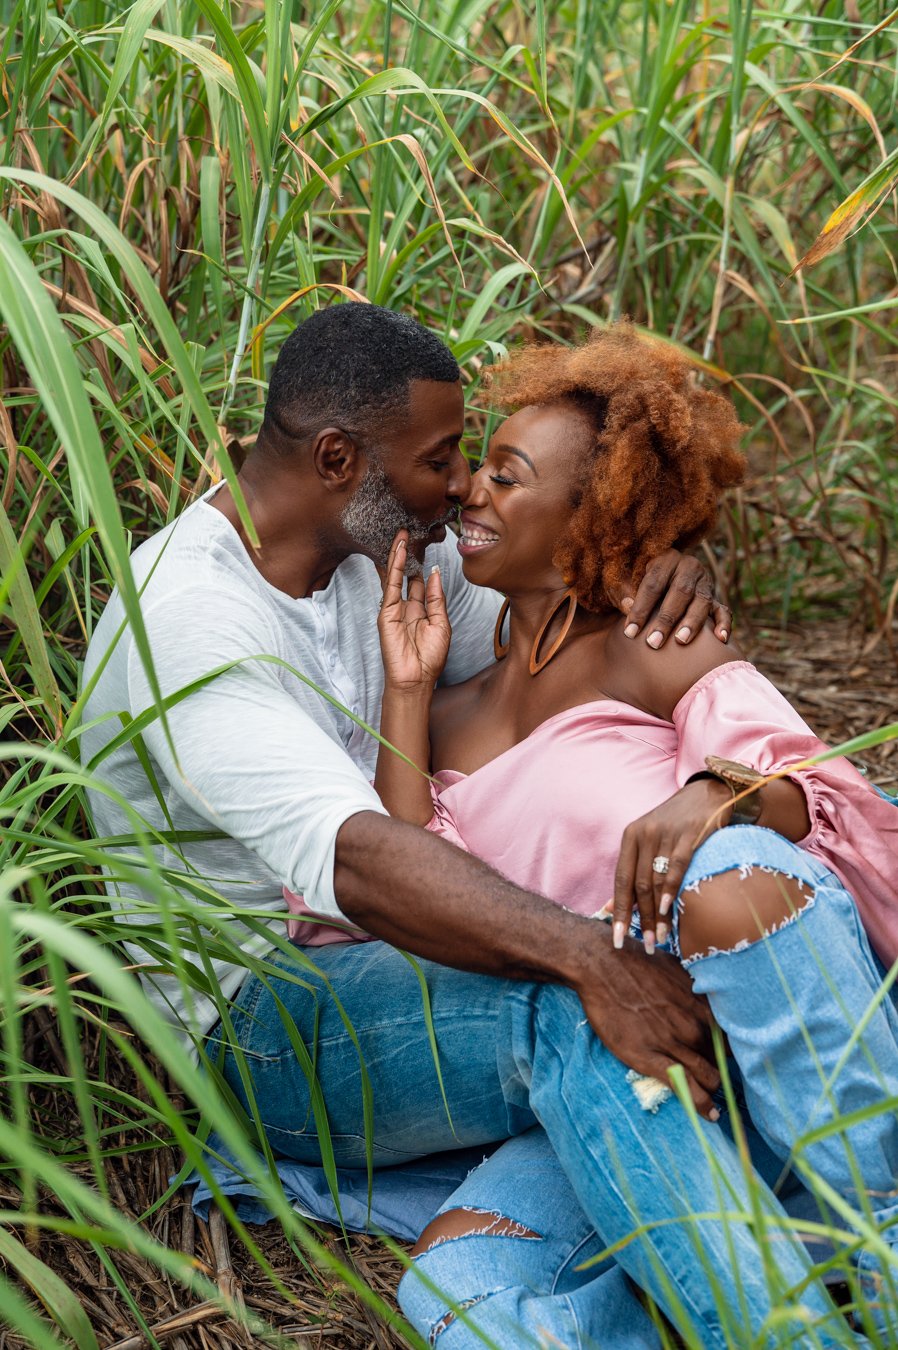 Lisa Nichols and Marcellus Hall Engagement Shoot on the island of ...